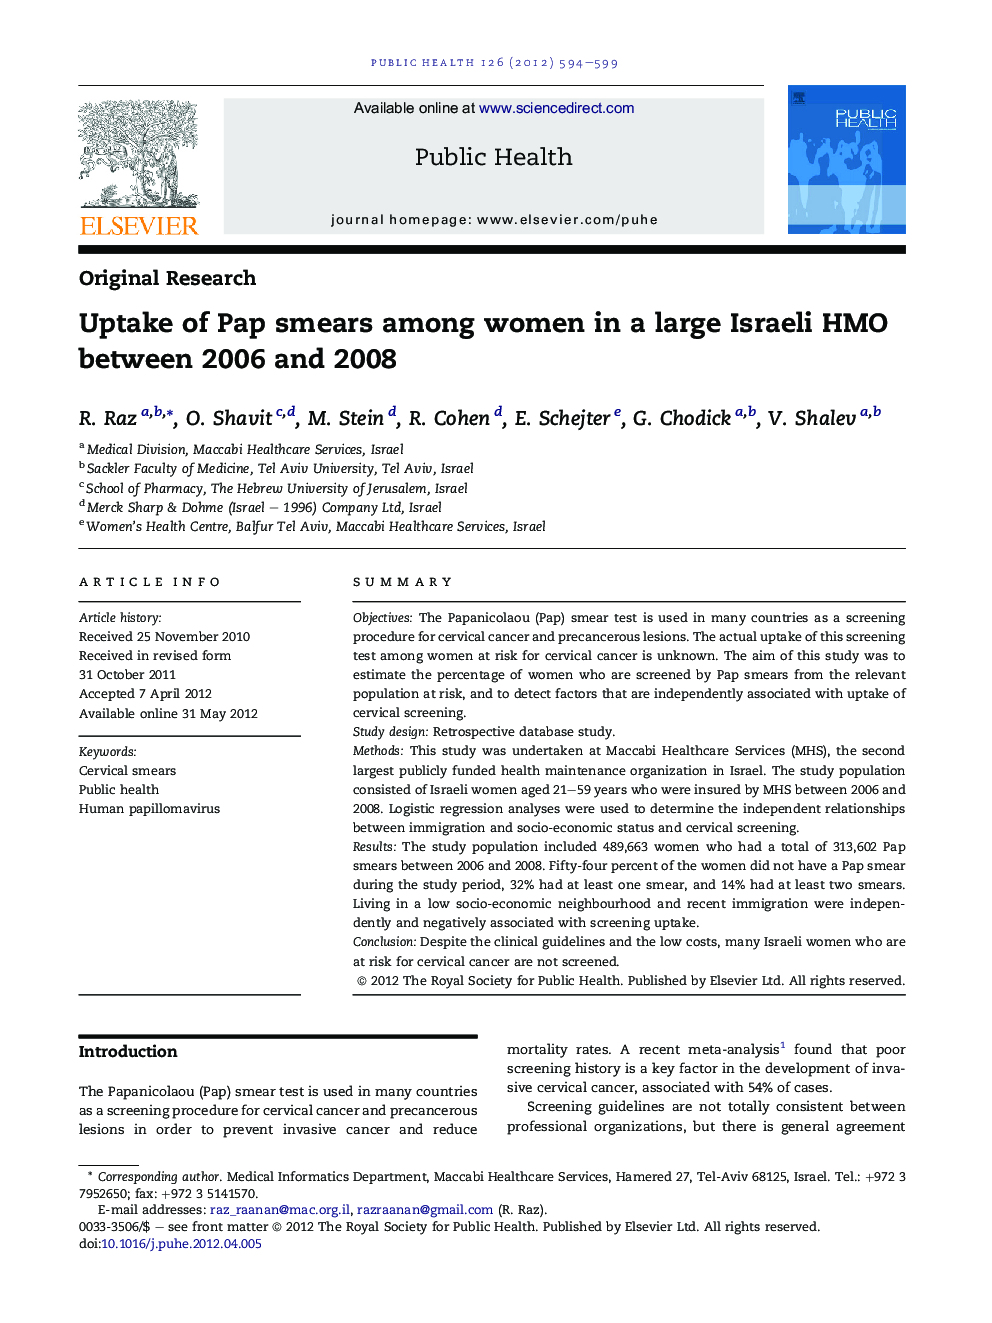 Uptake of Pap smears among women in a large Israeli HMO between 2006 and 2008